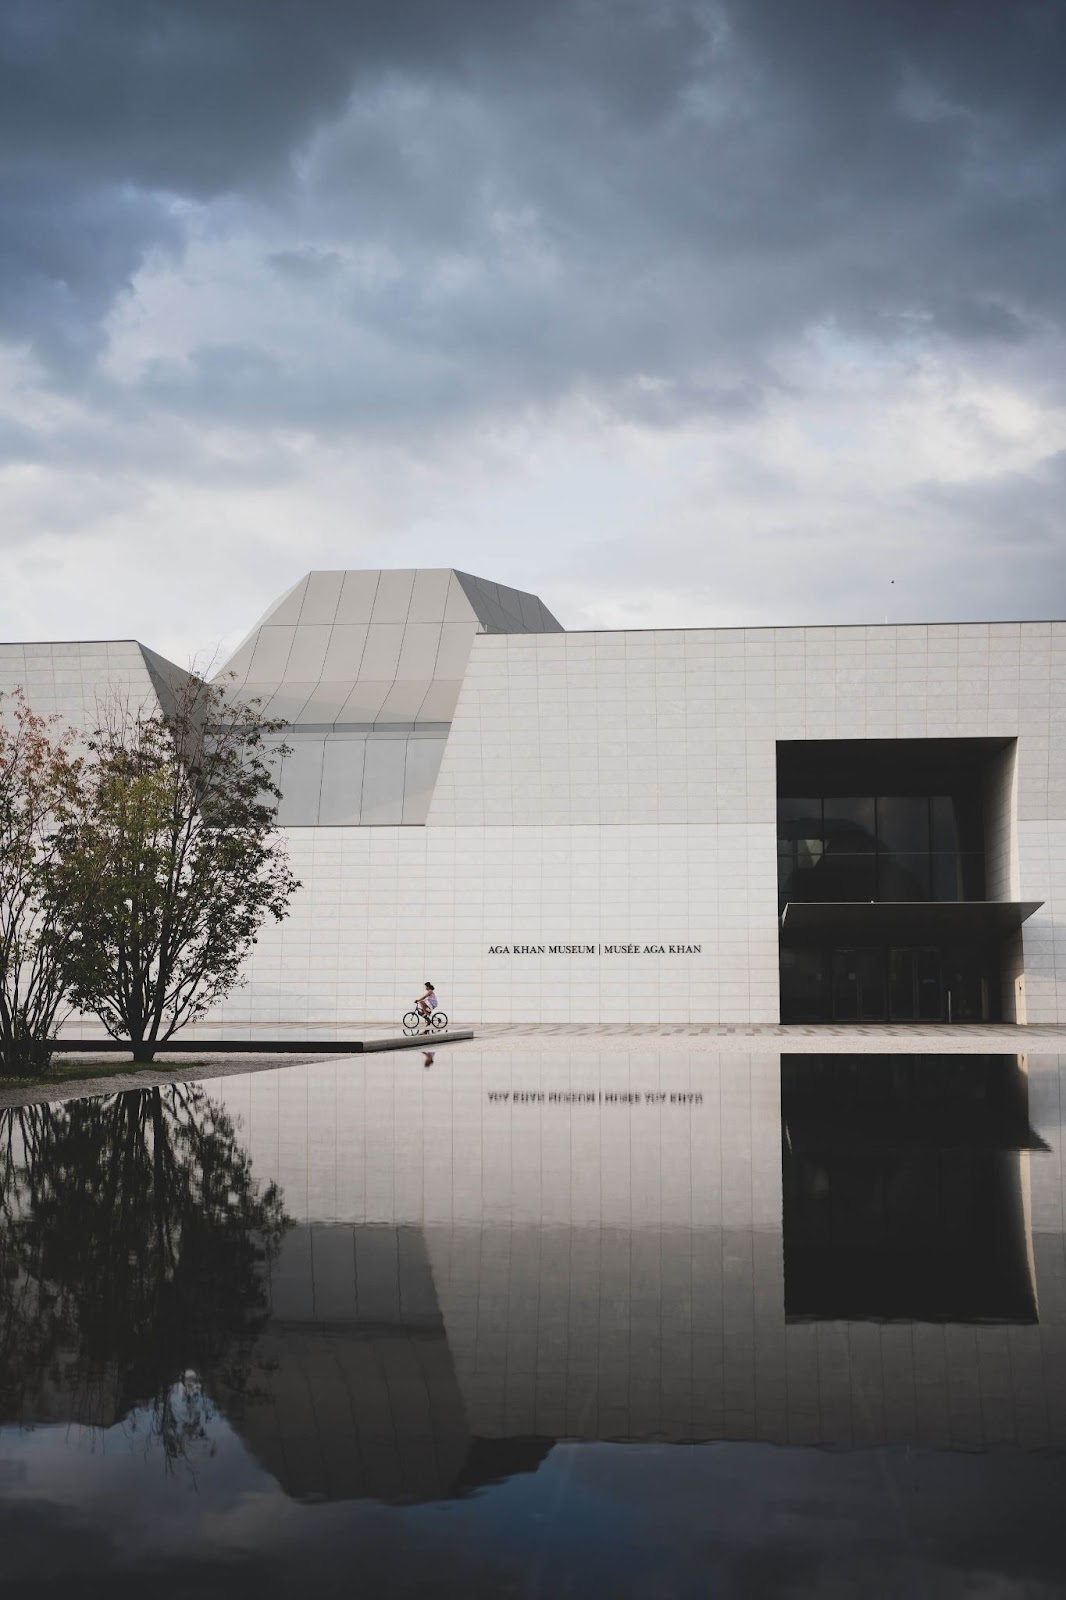 1 day in Toronto, Aga Khan Museum, overview of Muslim civilizations contributions to the community and the world